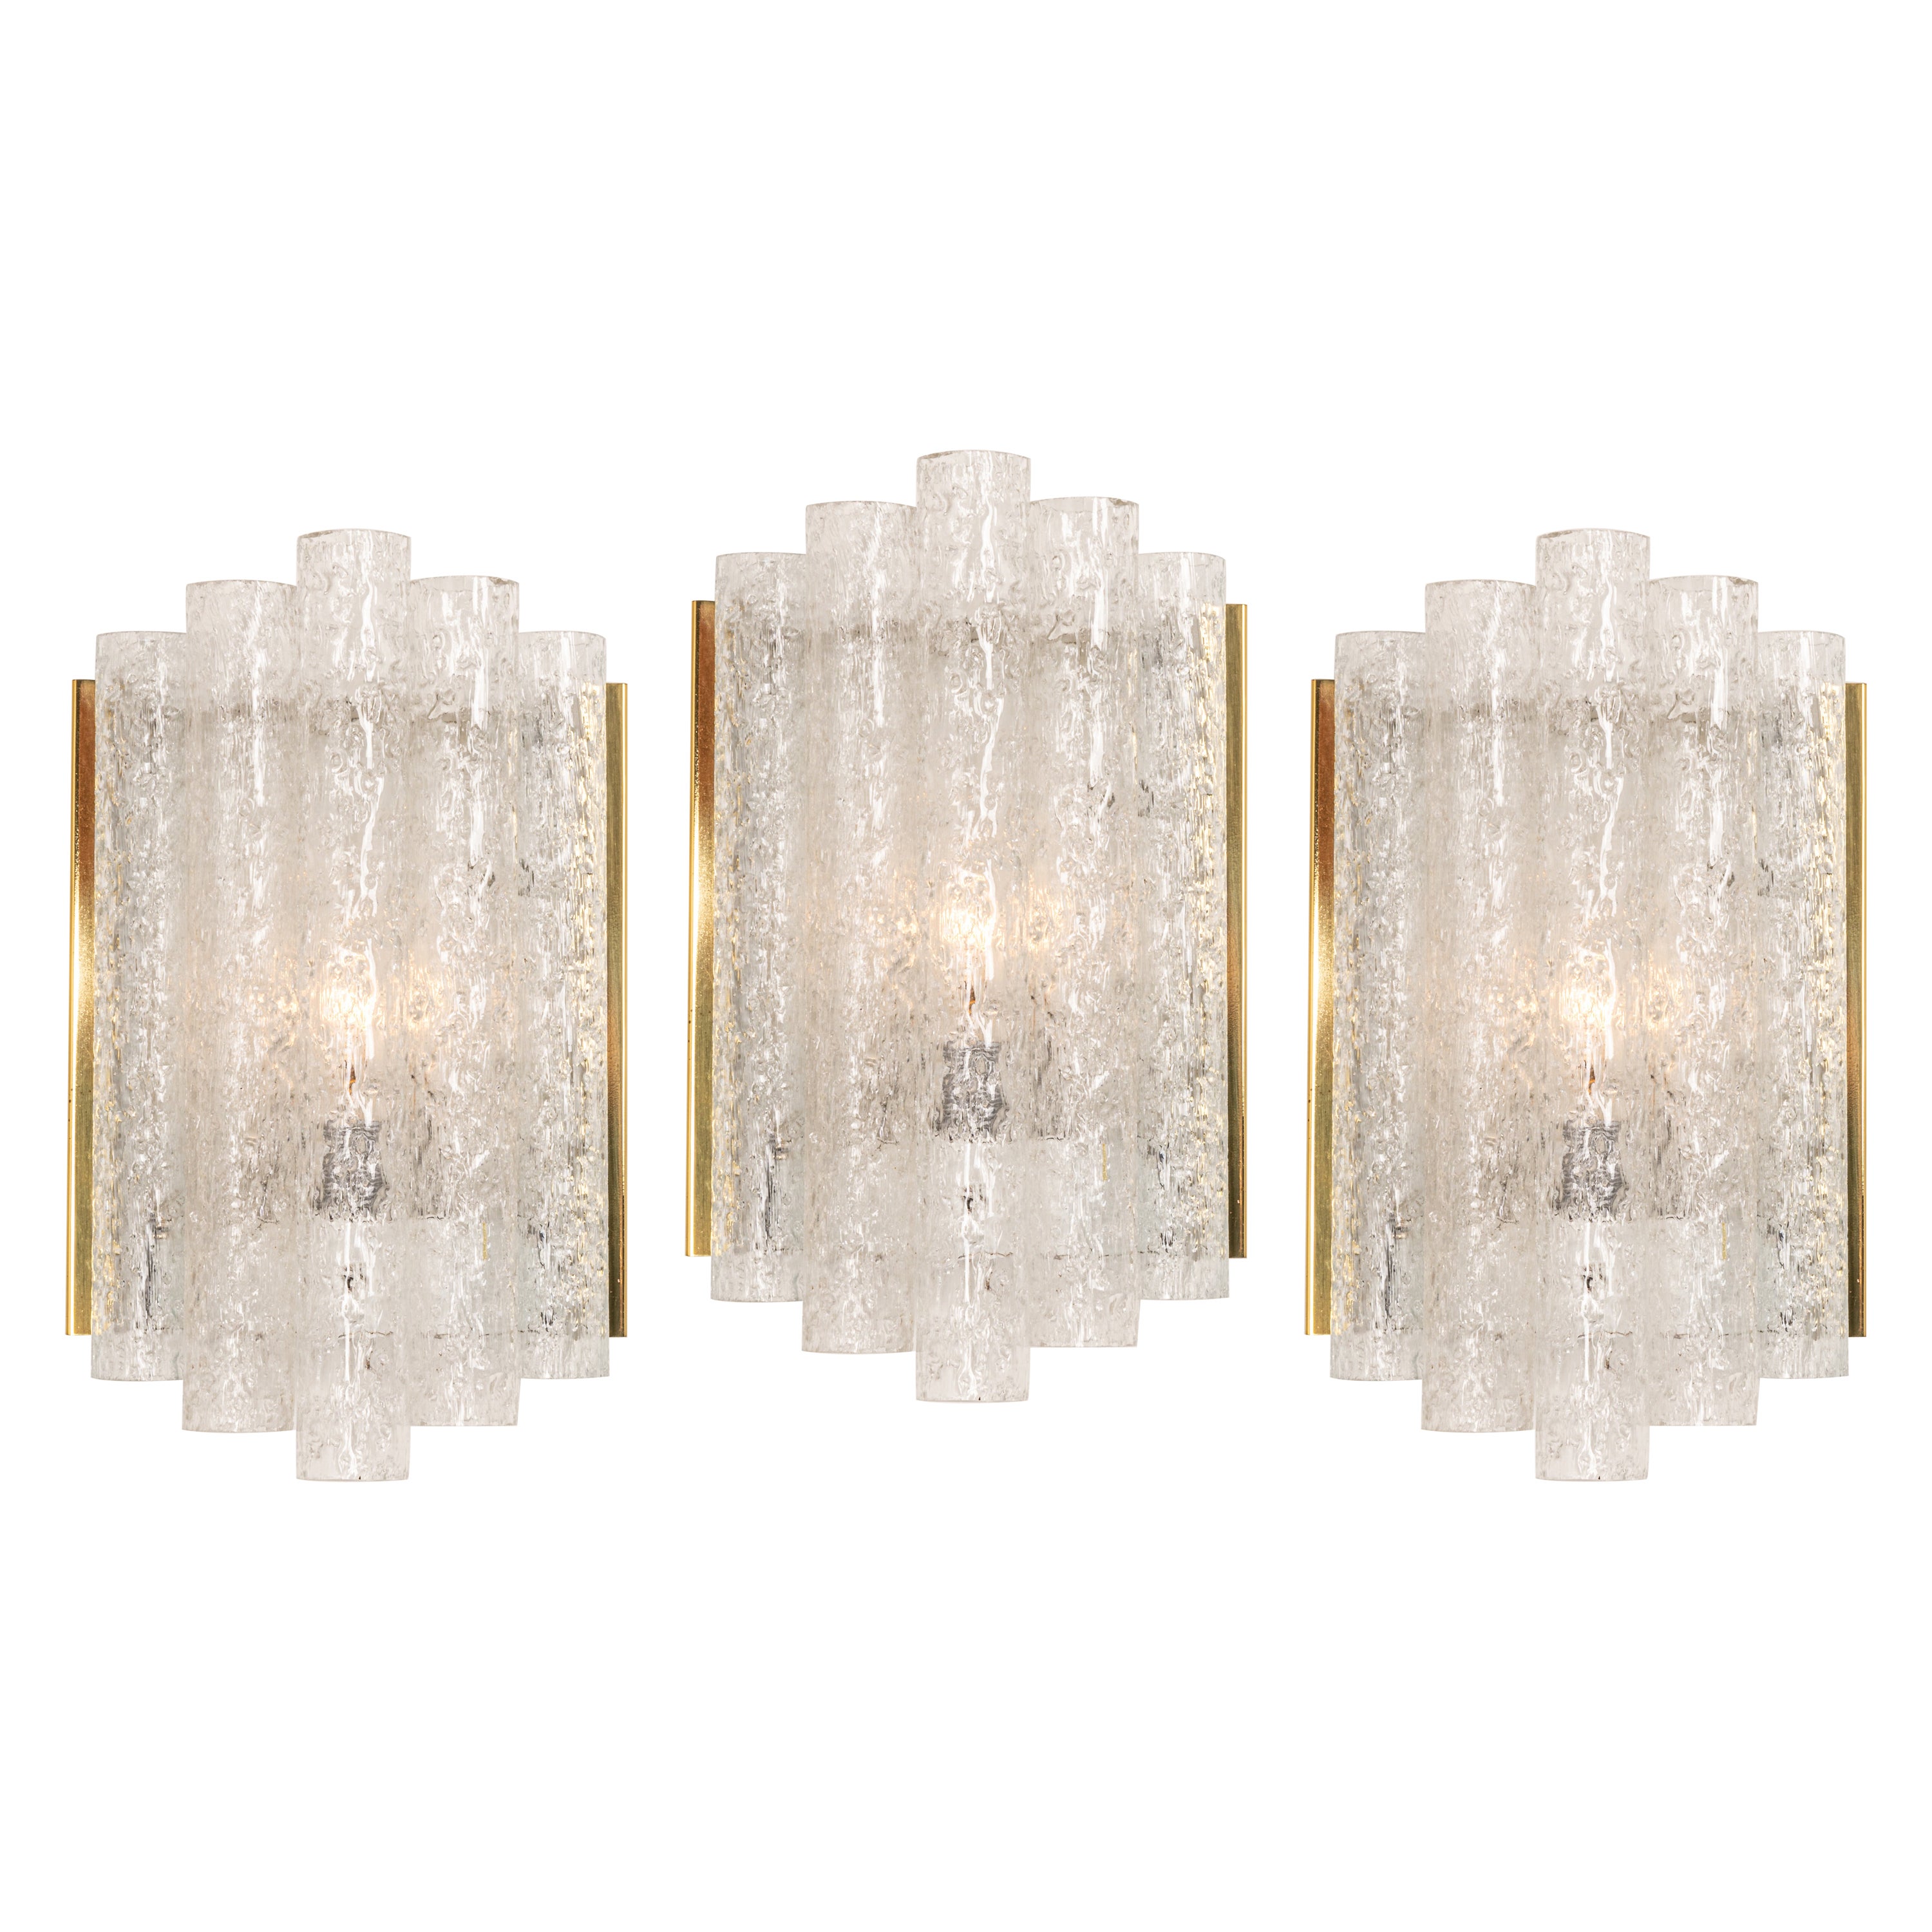 1 of 3 Brass Ice Glass Wall light Sconces by Doria, Germany, 1960s For Sale